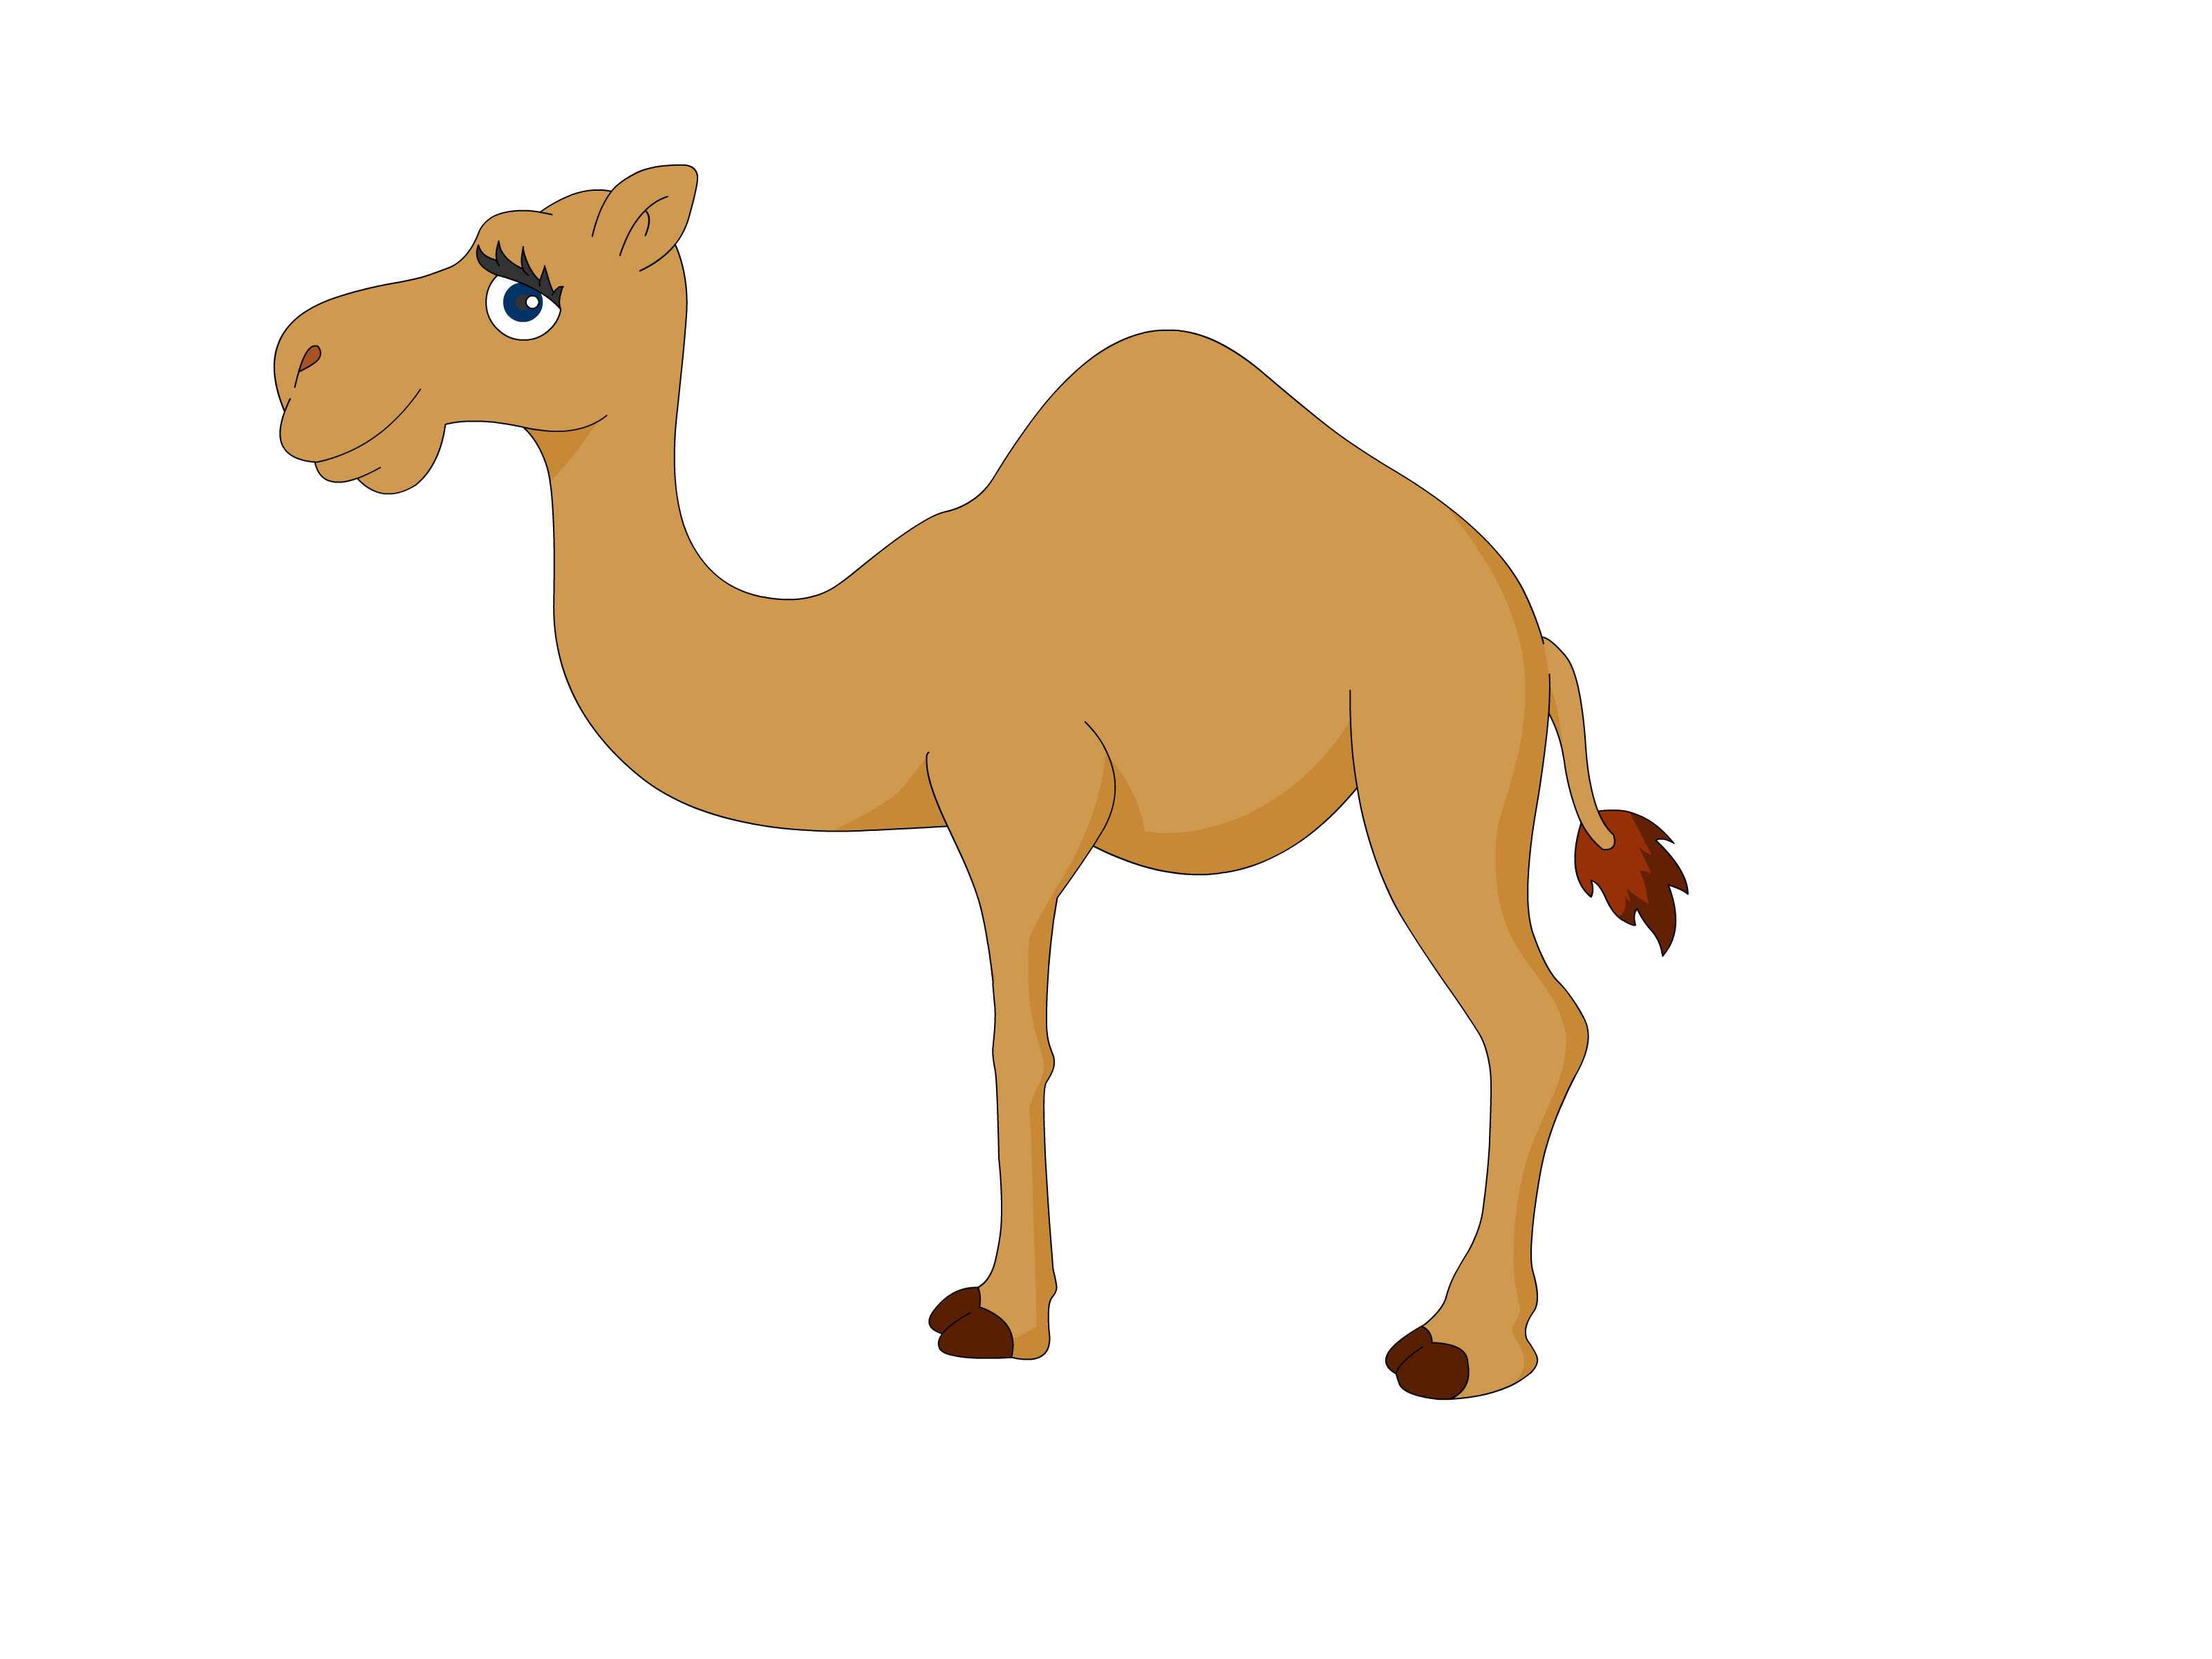 Moving camel clipart.